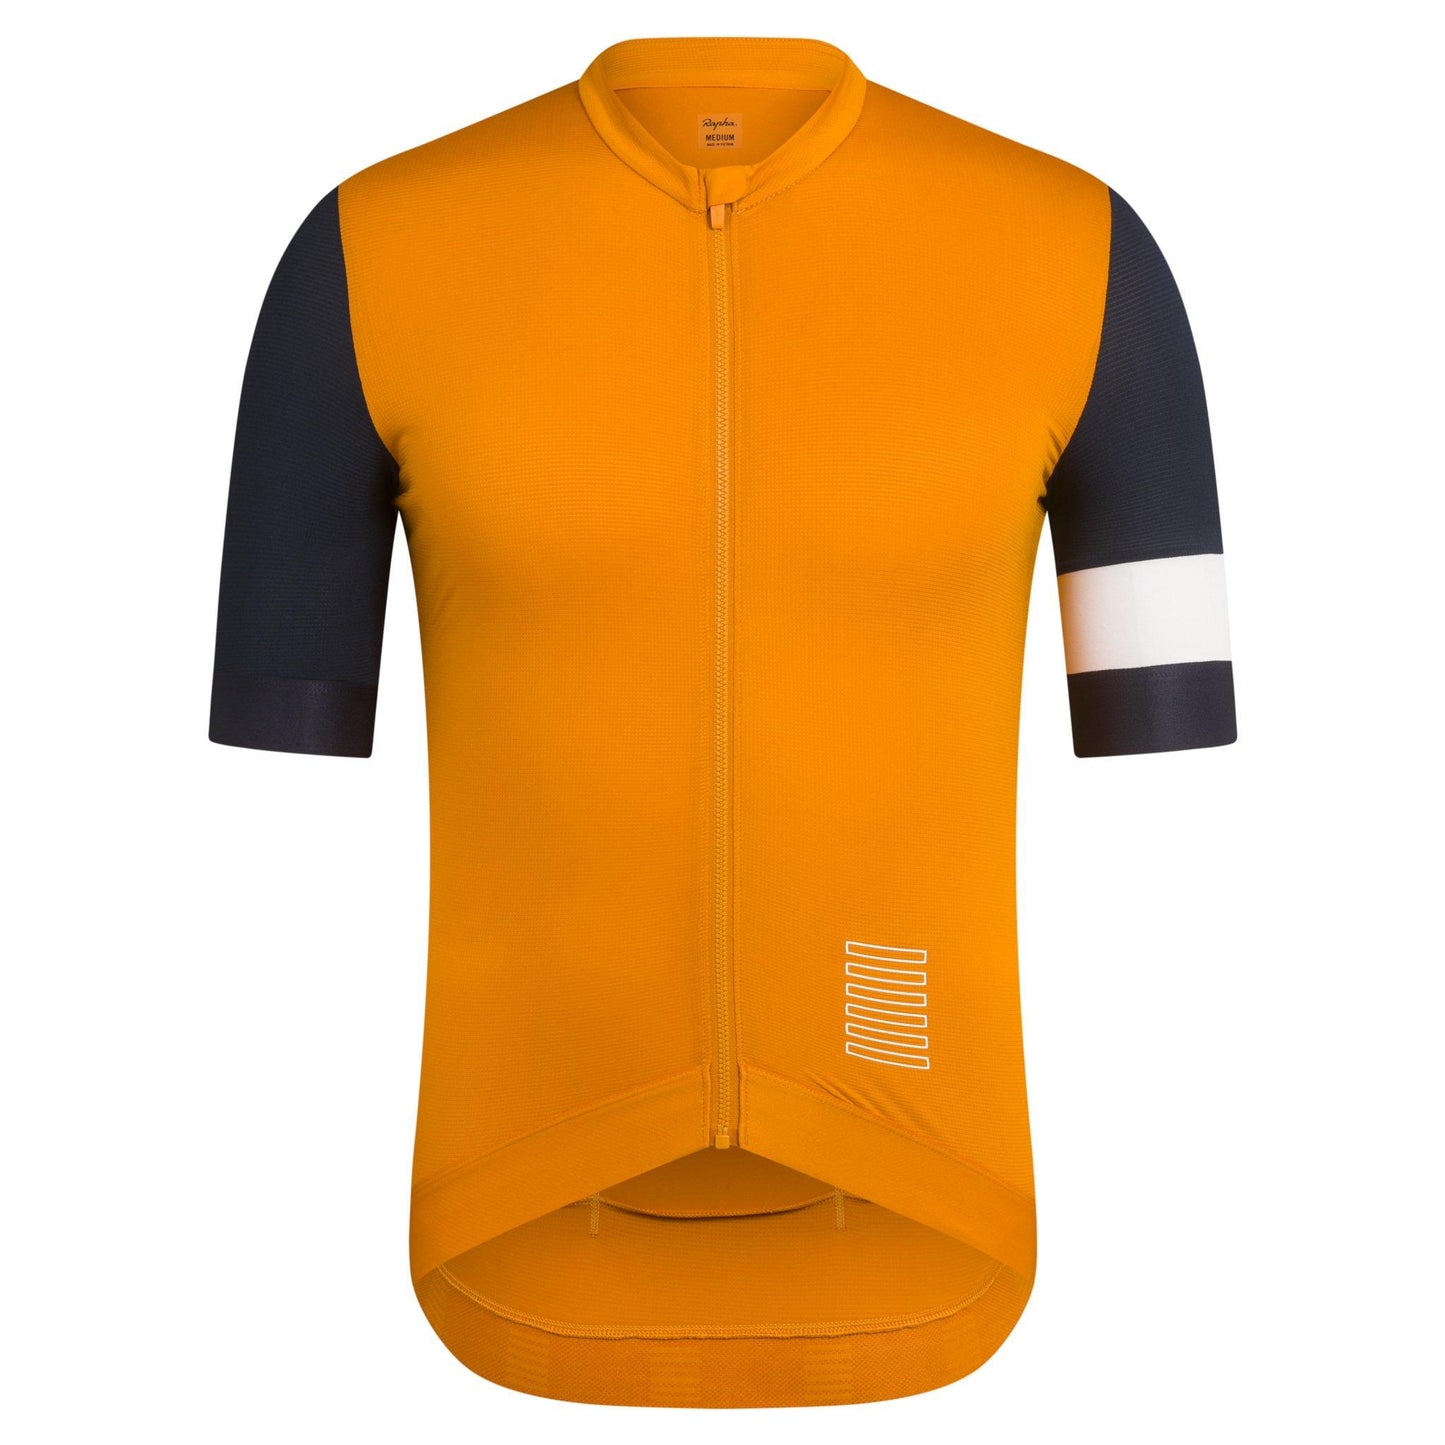 Rapha Mens Pro Team Training Jersey, Mustard/Dark Navy buy online at Woolys Wheels Sydney with Free delivery